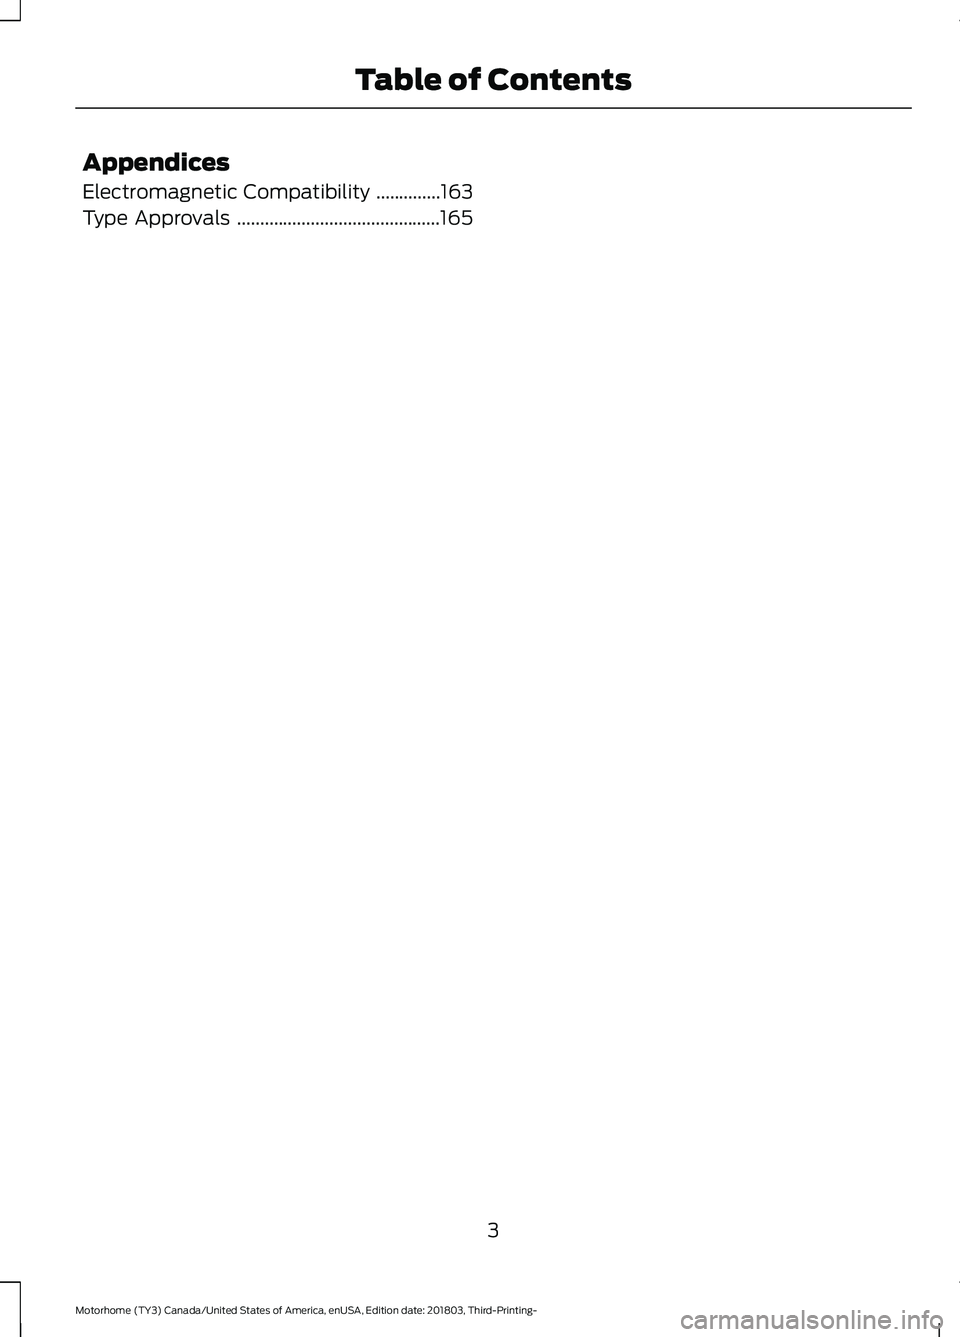 FORD F-53 2019  Owners Manual Appendices
Electromagnetic Compatibility..............163
Type Approvals............................................165
3
Motorhome (TY3) Canada/United States of America, enUSA, Edition date: 201803, 